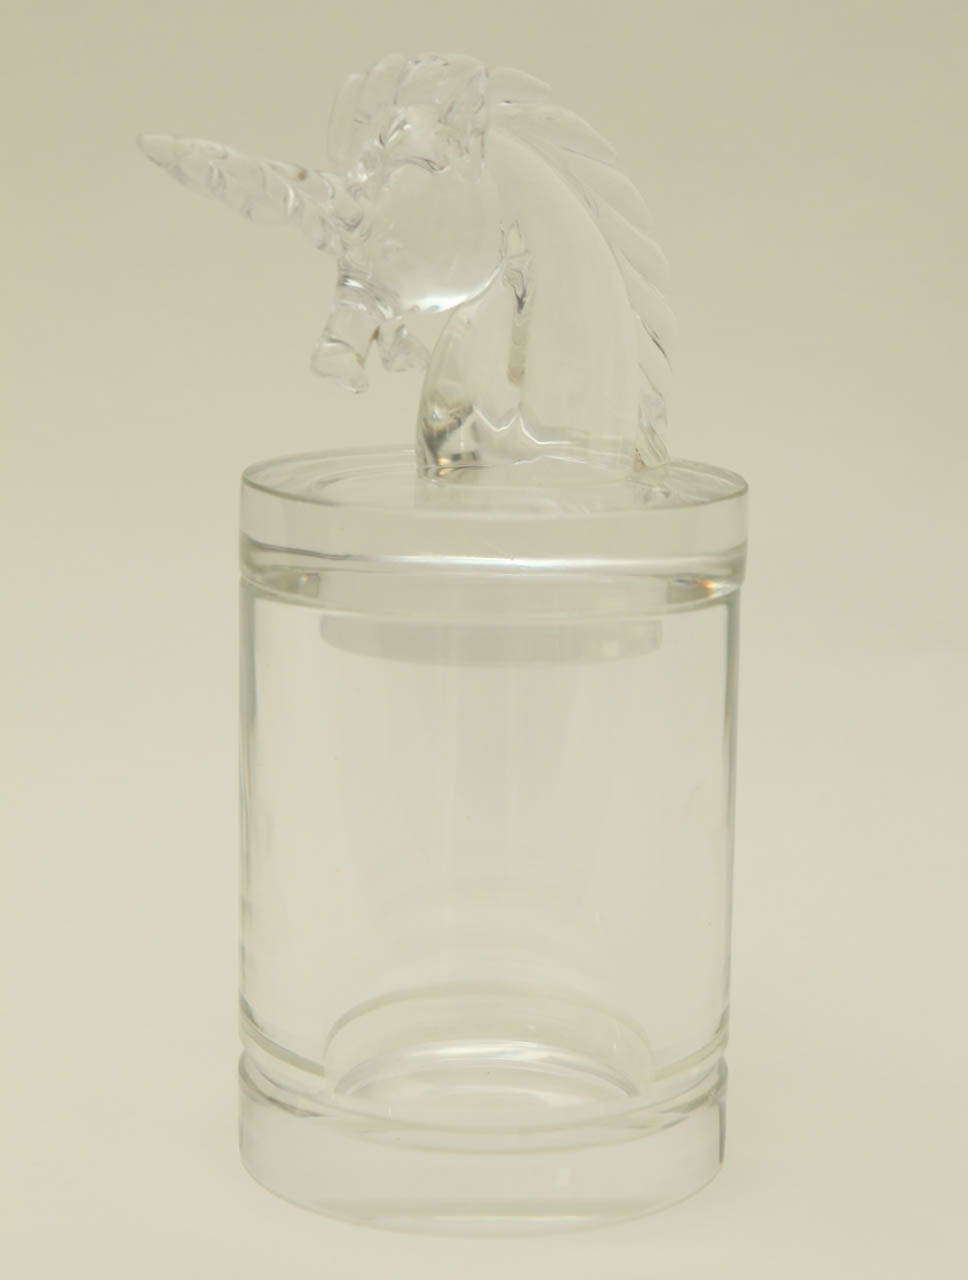 A fanciful unicorn tops the lid of this crystal container with a beveled detail at the base. The Cartier signature is etched on the underside of the container.